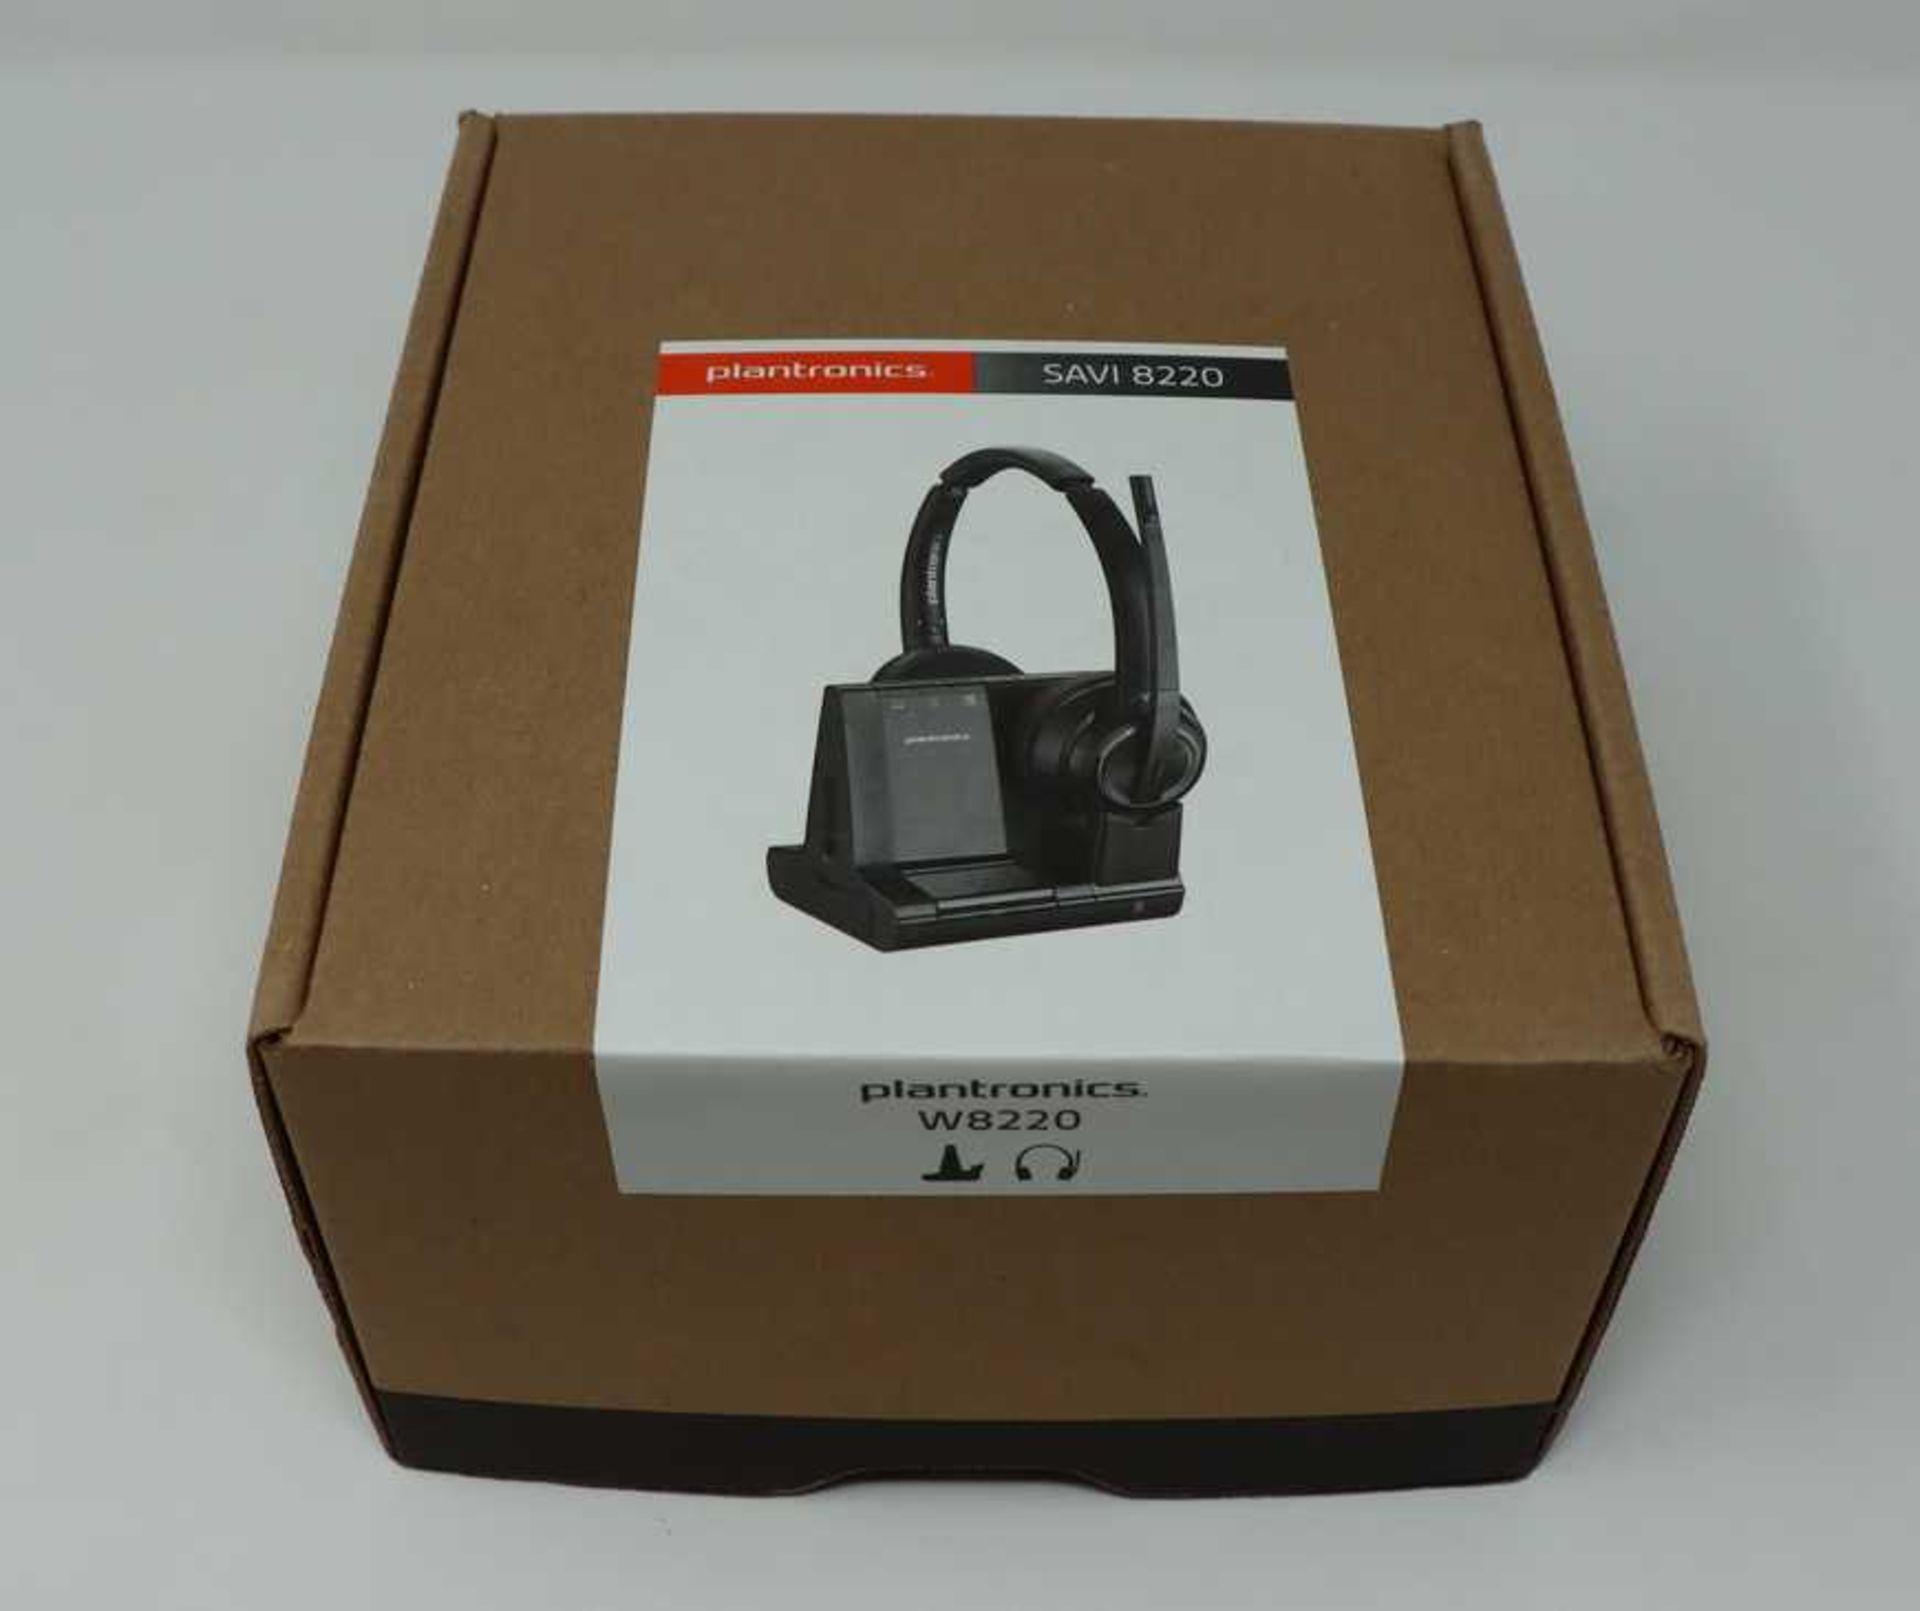 A boxed as new Plantronics Savi W8220 Wireless DECT Stereo Headset with Dock (Box opened).